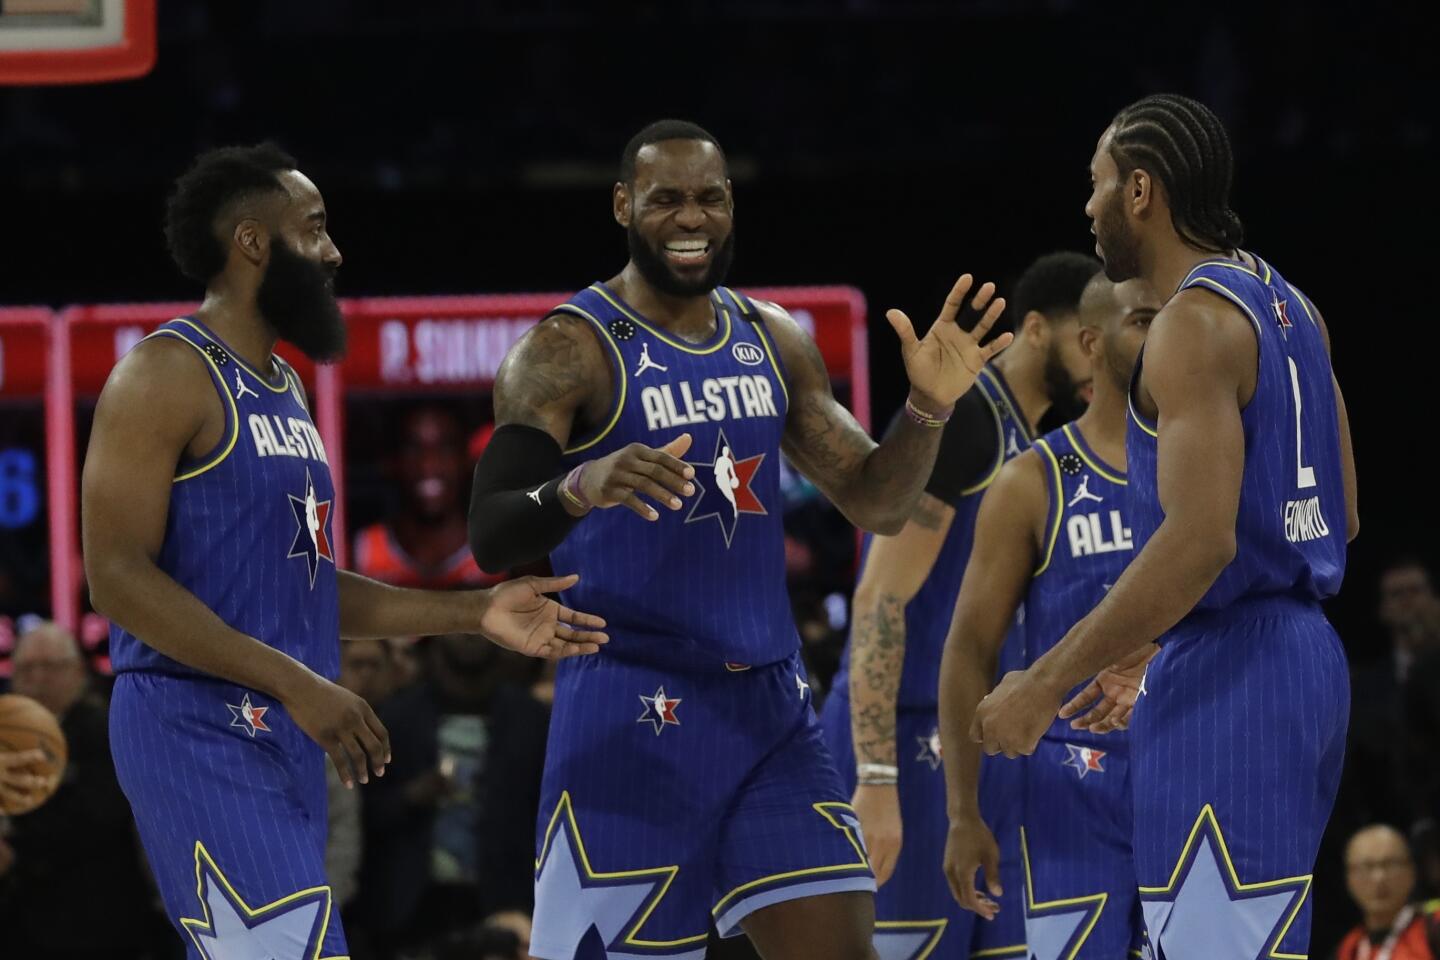 Lakers forward LeBron James, center, celebrates with teammates James Harden of Houston and Kawhi Leonard of the Clippers during the 69th NBA All-Star game at the United Center in Chicago on Feb. 16, 2020.